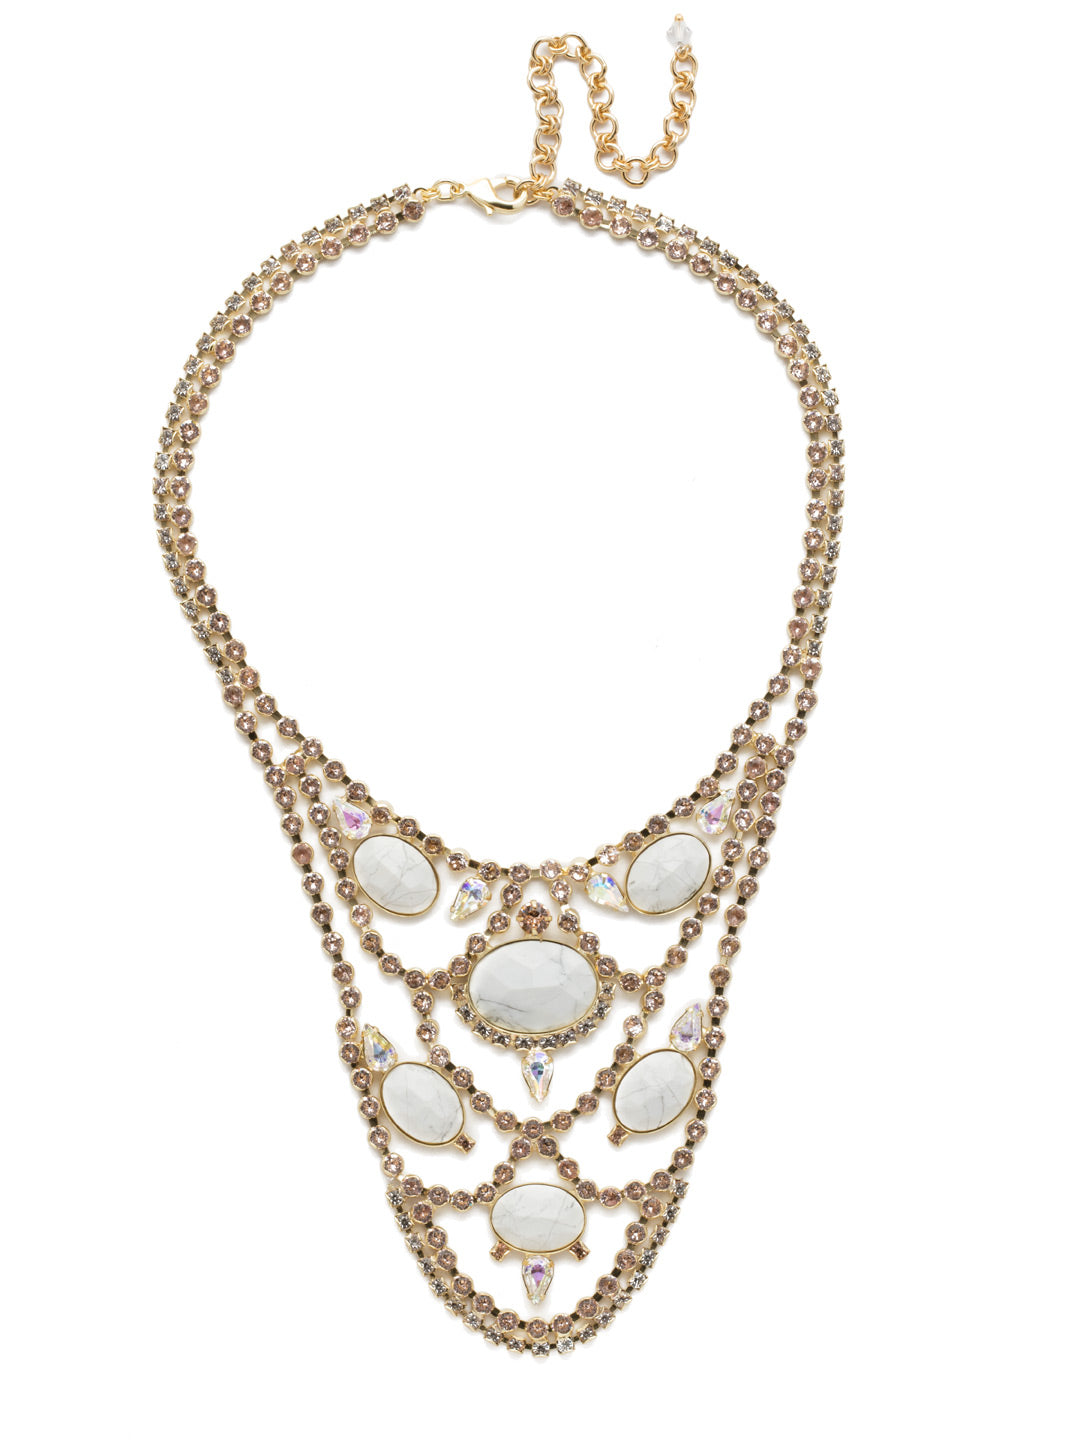 Oval Ovation Necklace - NCU22BGSCL - <p>Six oval cabochons, accented by pear and round crystals are at the center of this beautiful bib-style design. From Sorrelli's Silky Clouds collection in our Bright Gold-tone finish.</p>